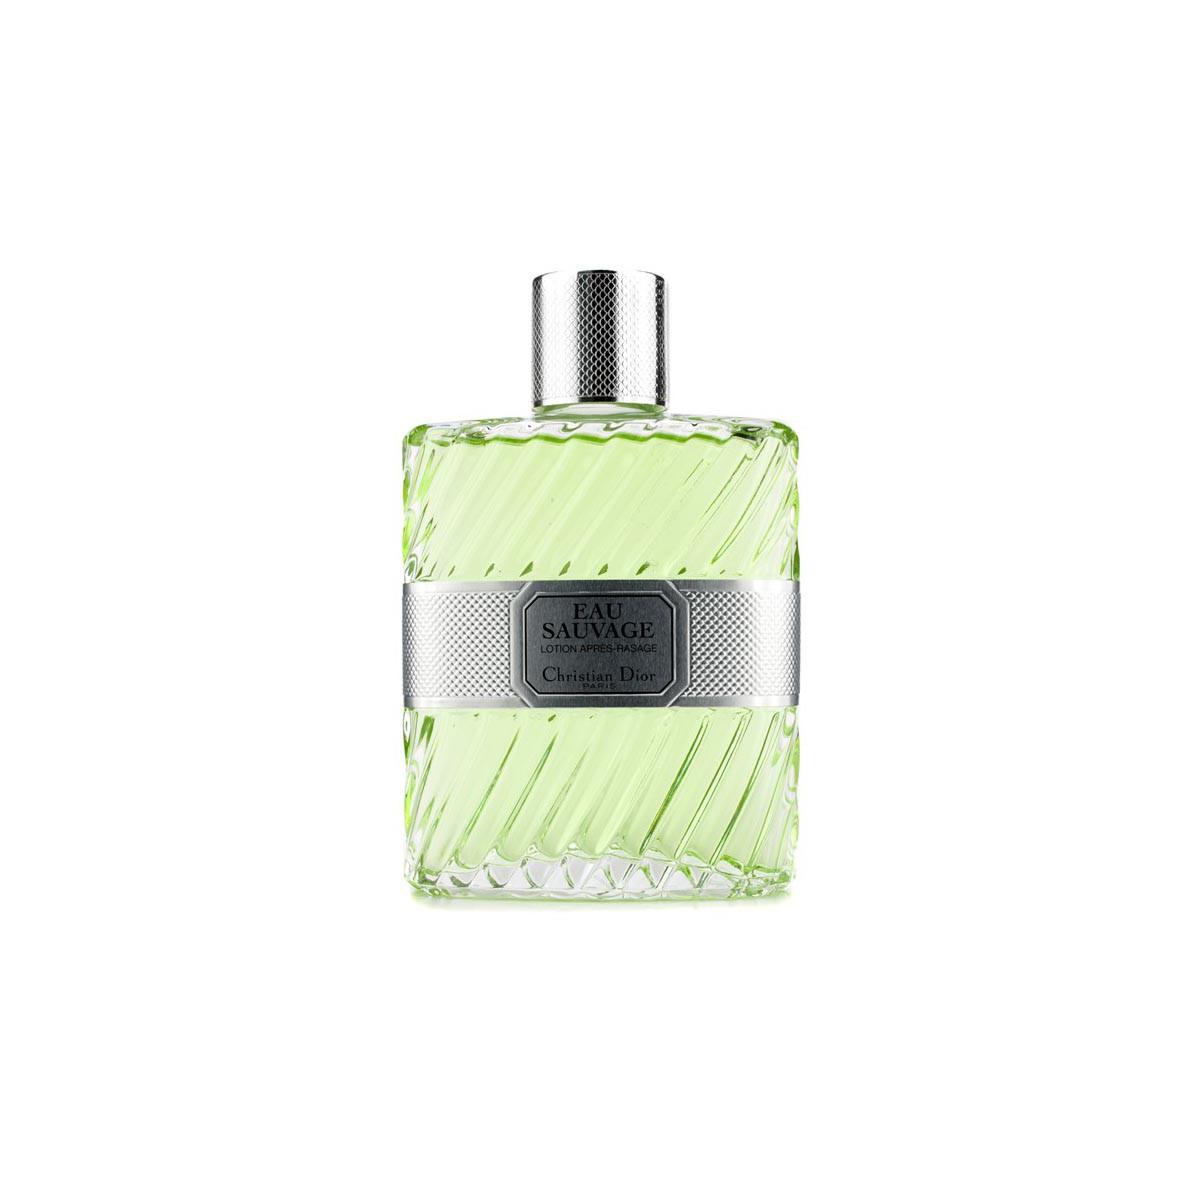 dior-lotion-eau-sauvage-after-shave-200ml